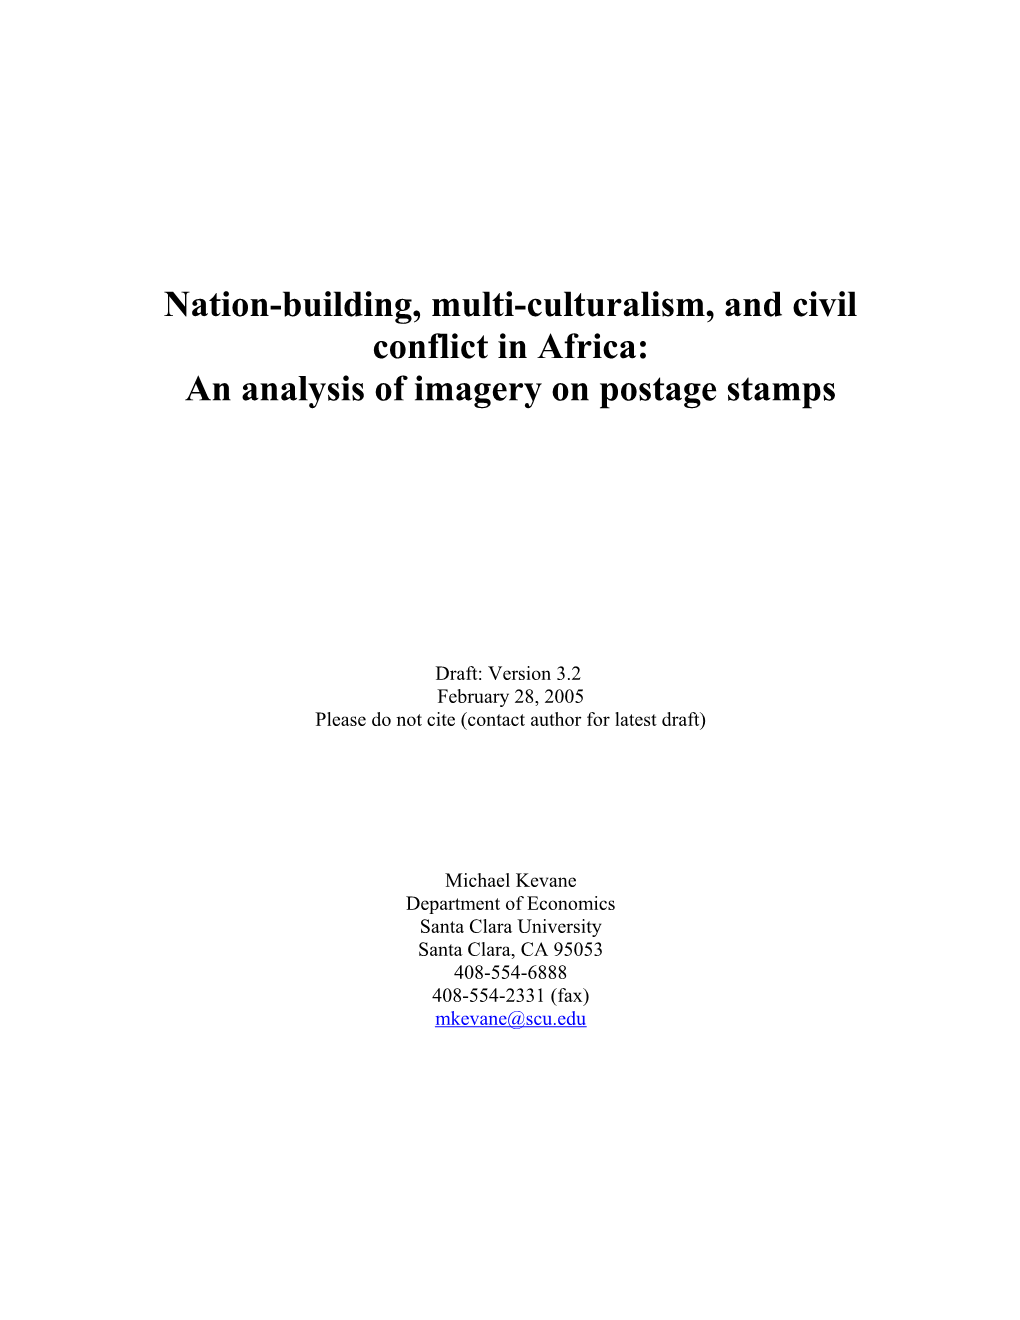 Nation-Building, Multi-Culturalism, and Civil Conflict in Africa